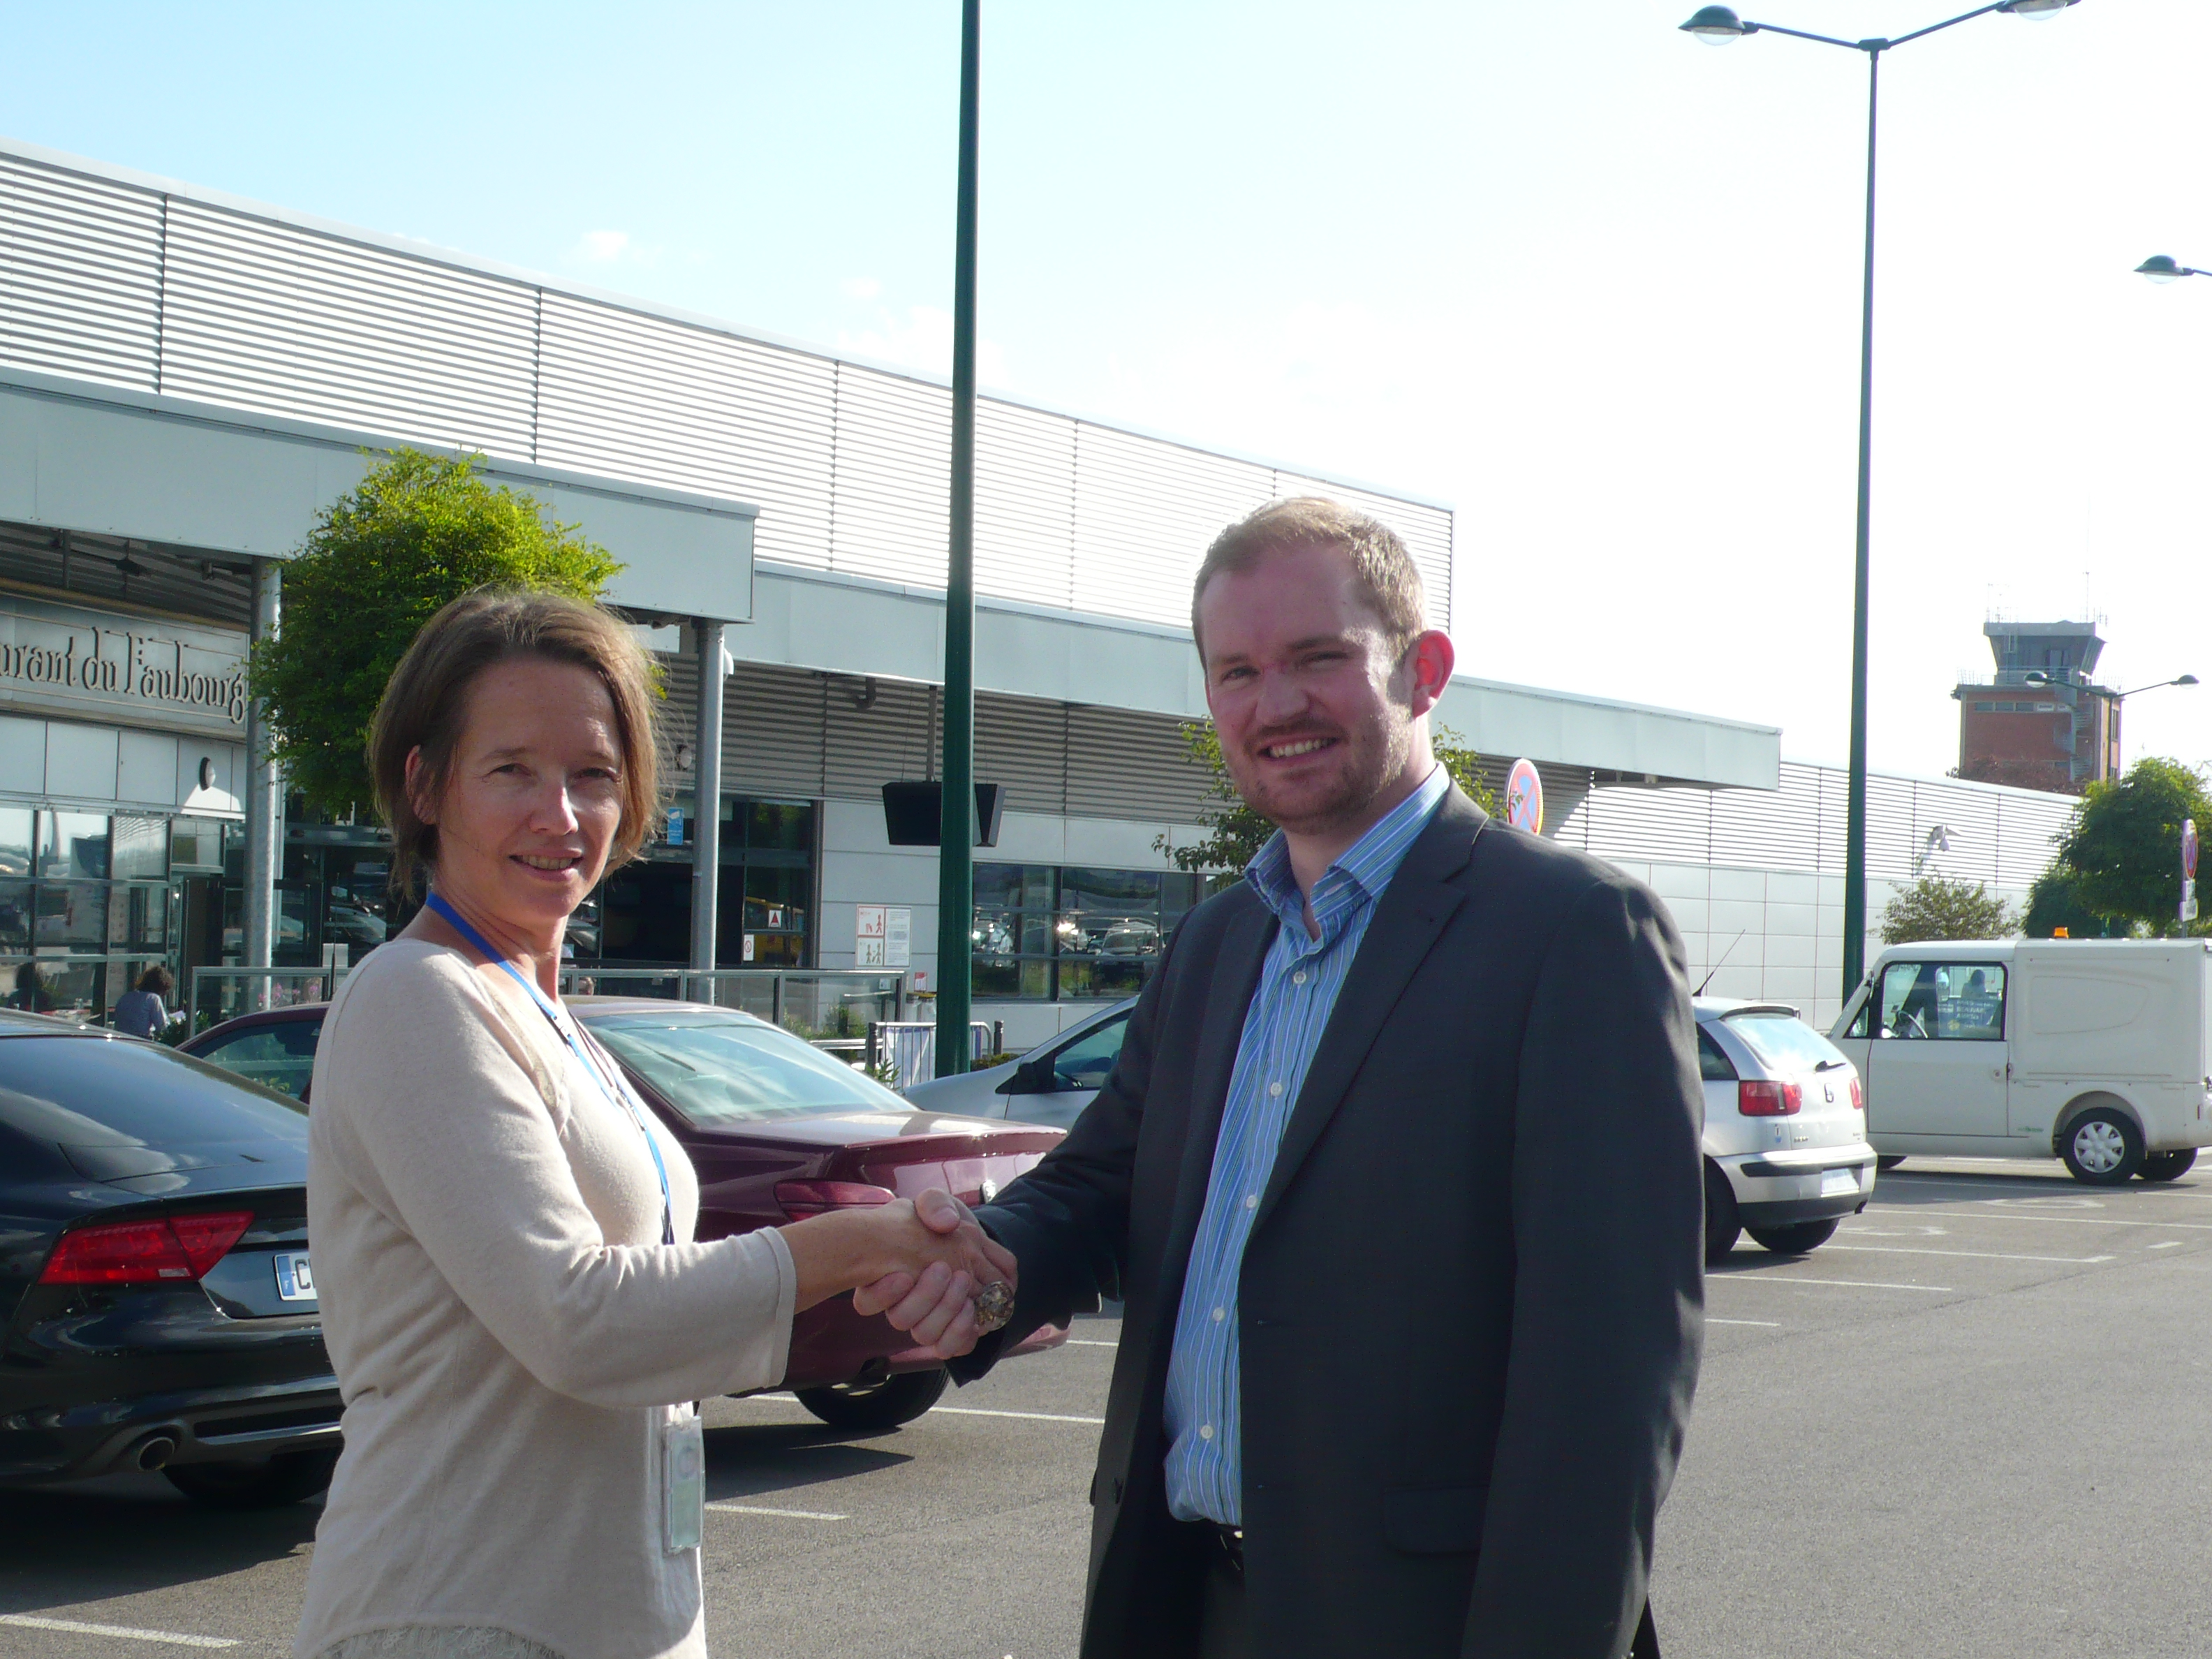 Beauvais Airport takes parking to the next level with ParkCloud